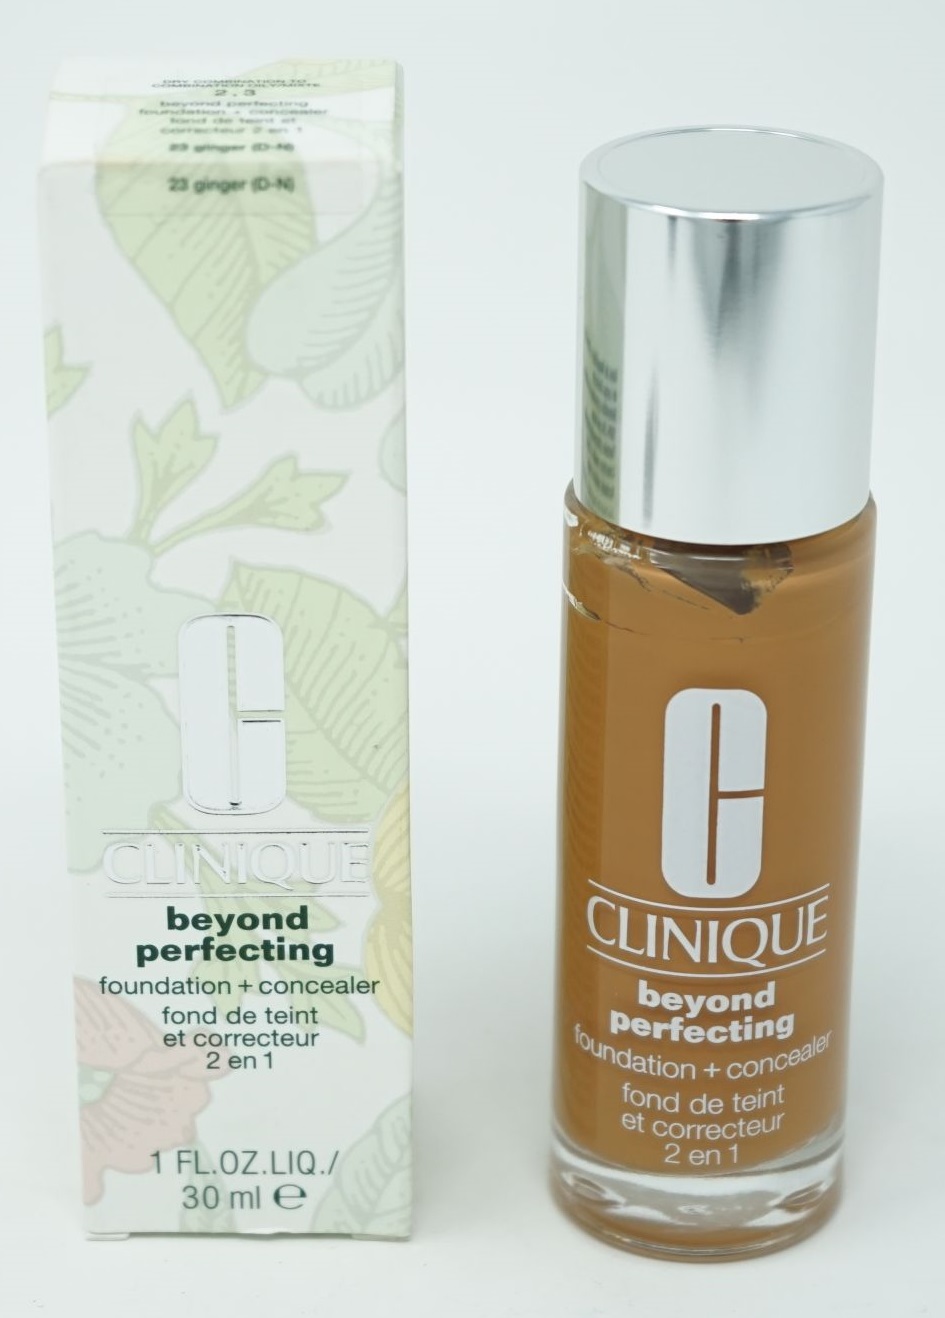 Clinique Beyond Perfecting foundation concealer 23 ginger (D-N)